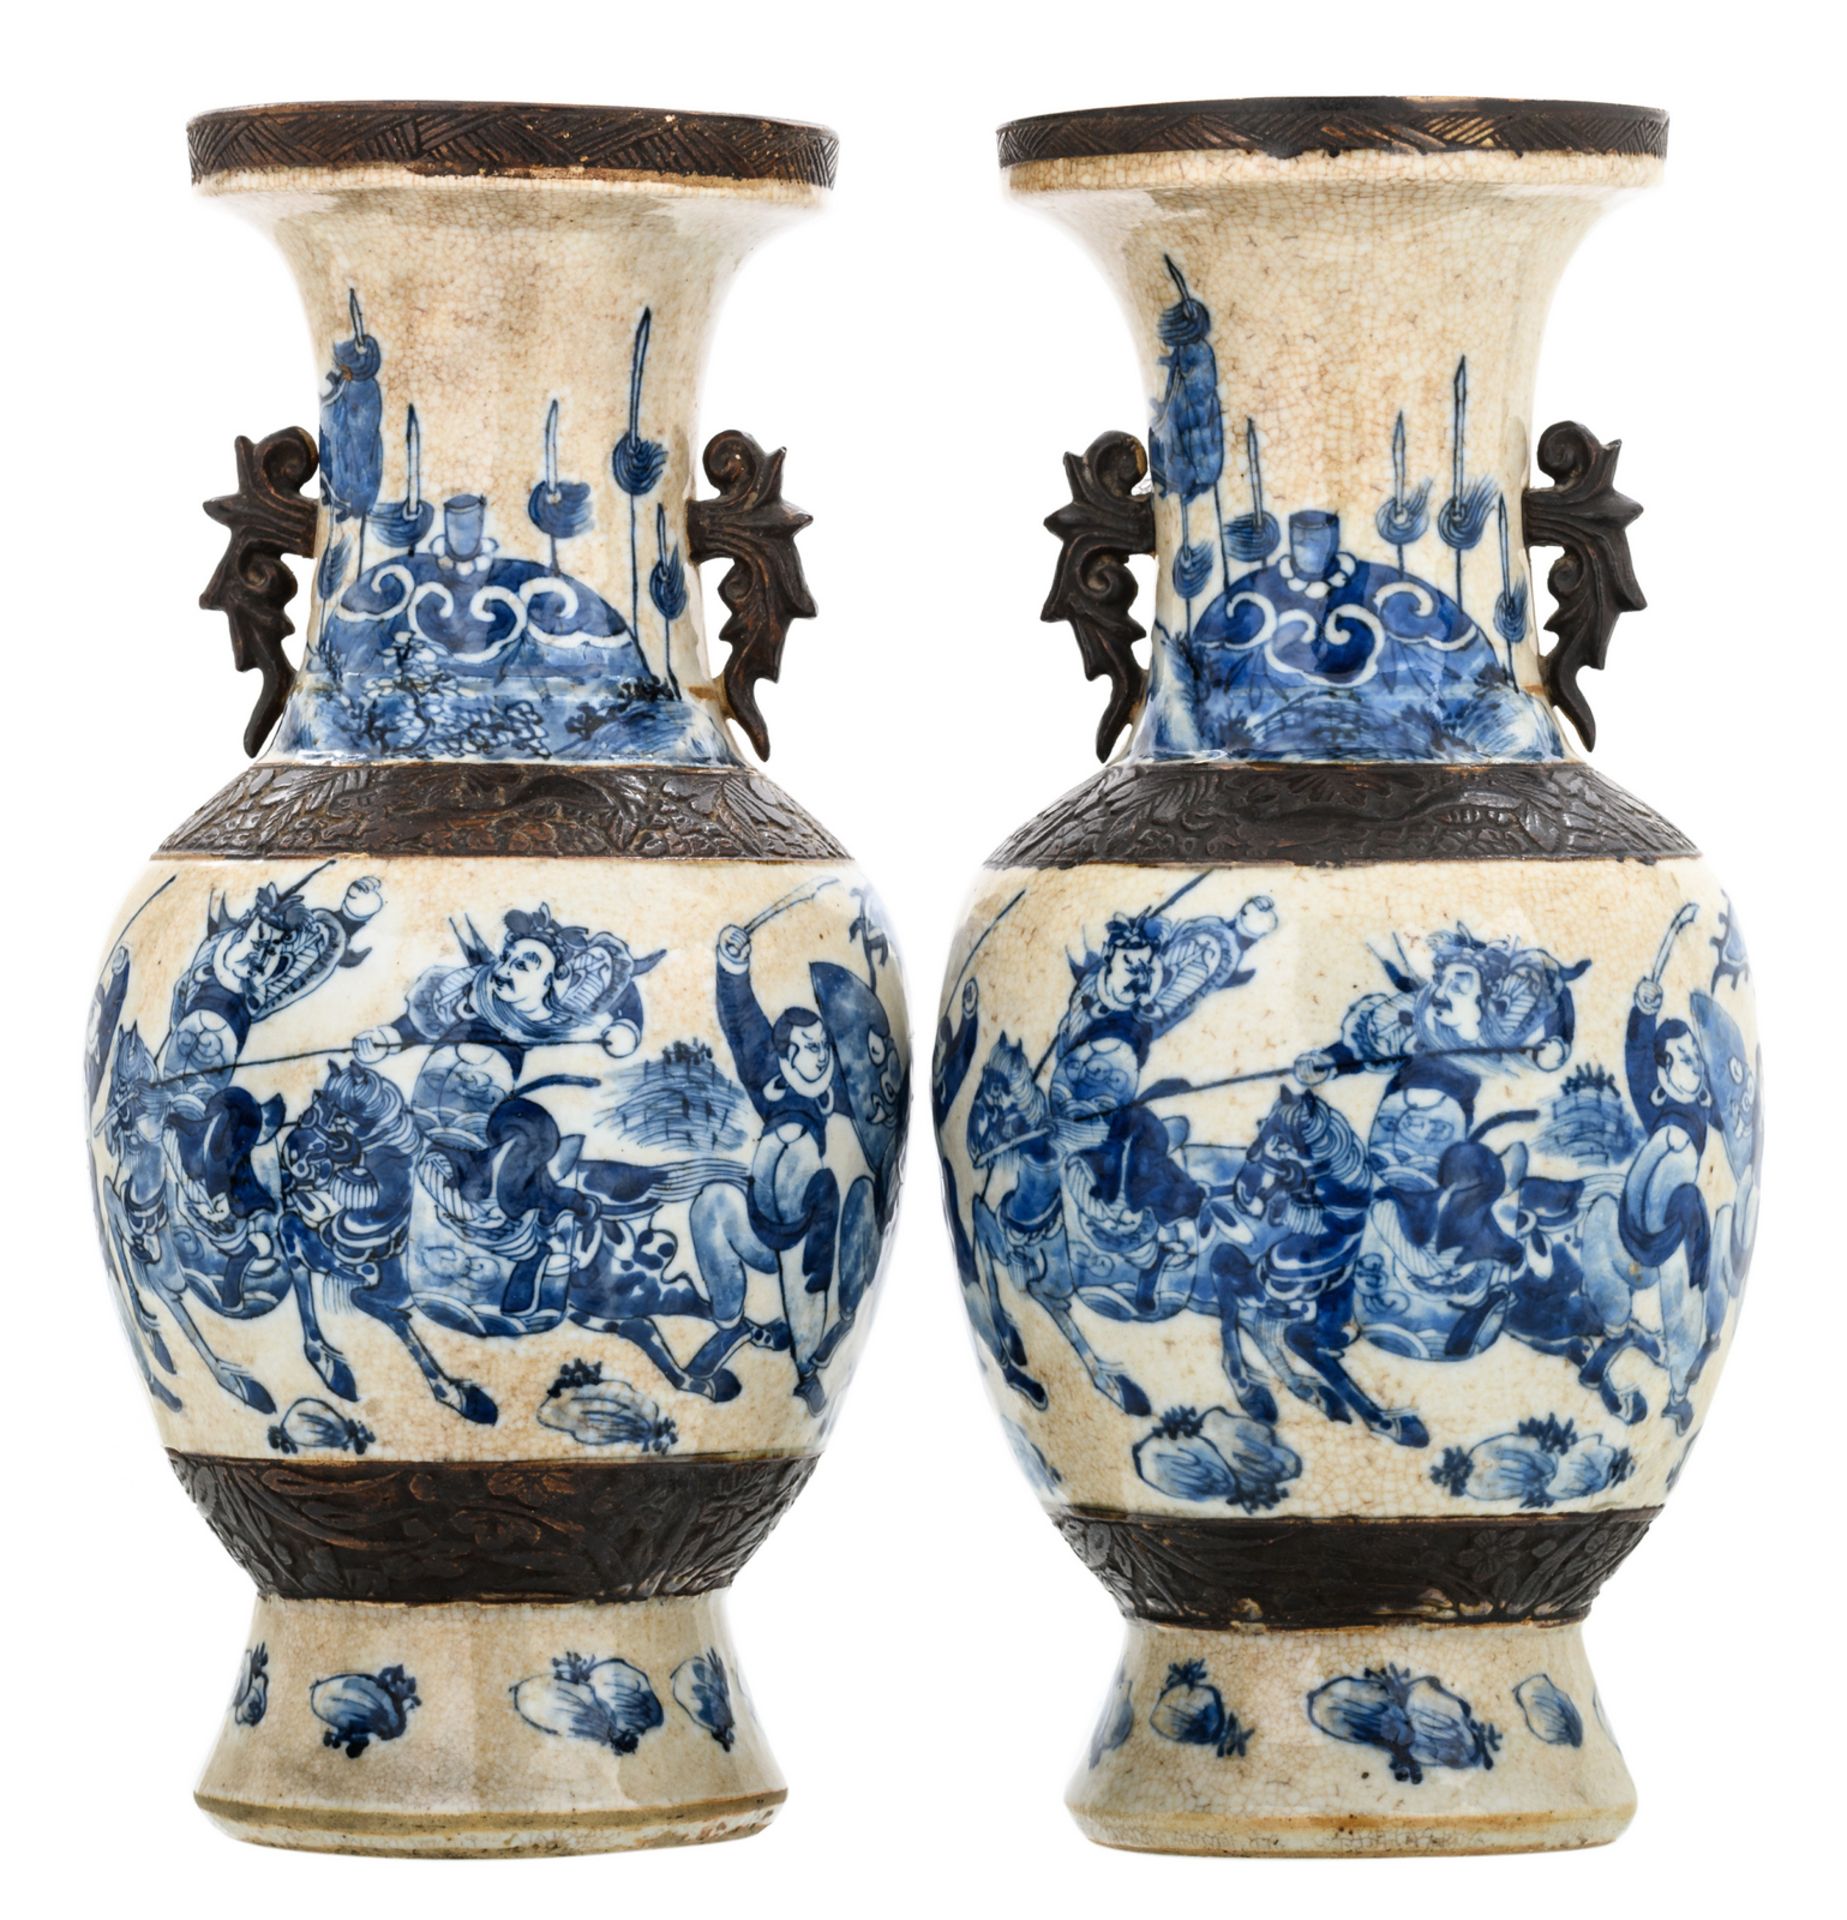 Two Chinese baluster shaped stoneware vases, blue and white decorated with warriors, marked, about